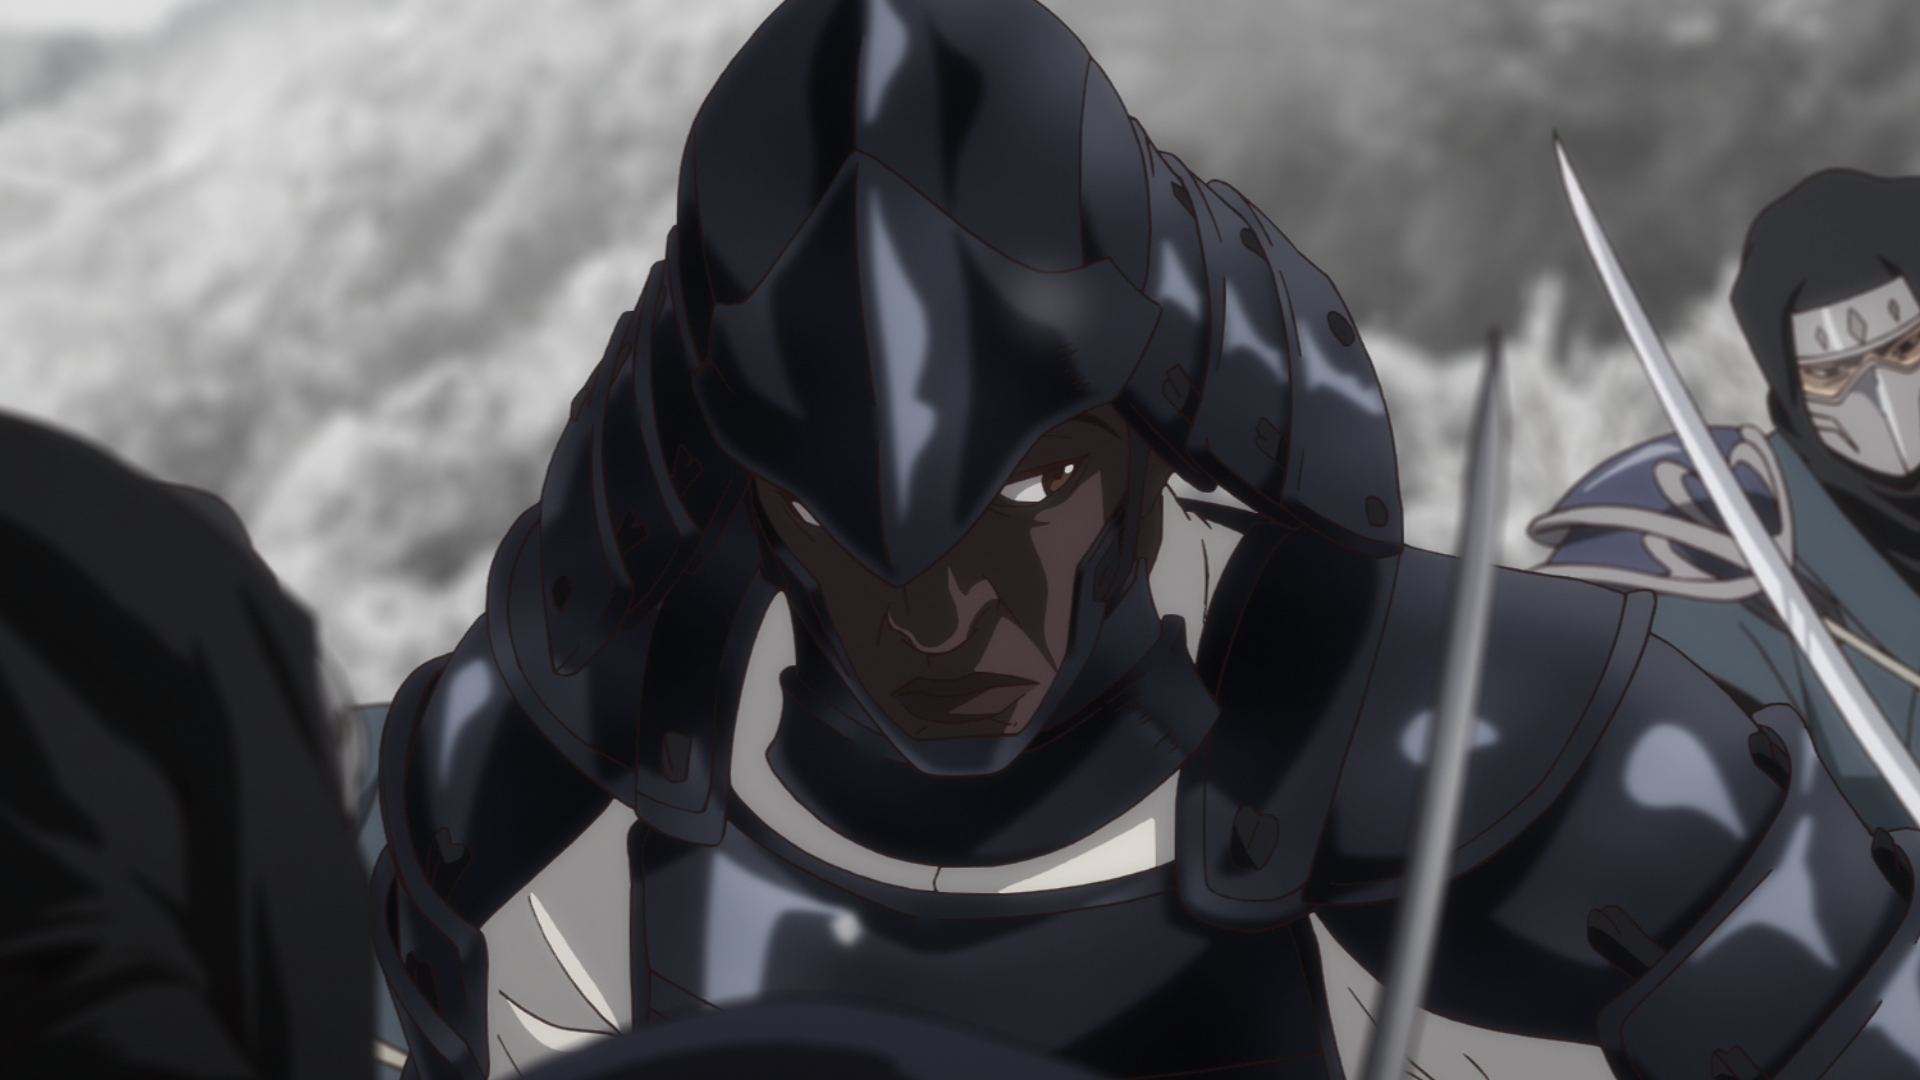 First Look Images At First African Samurai in Netflix’s Yasuke Anime